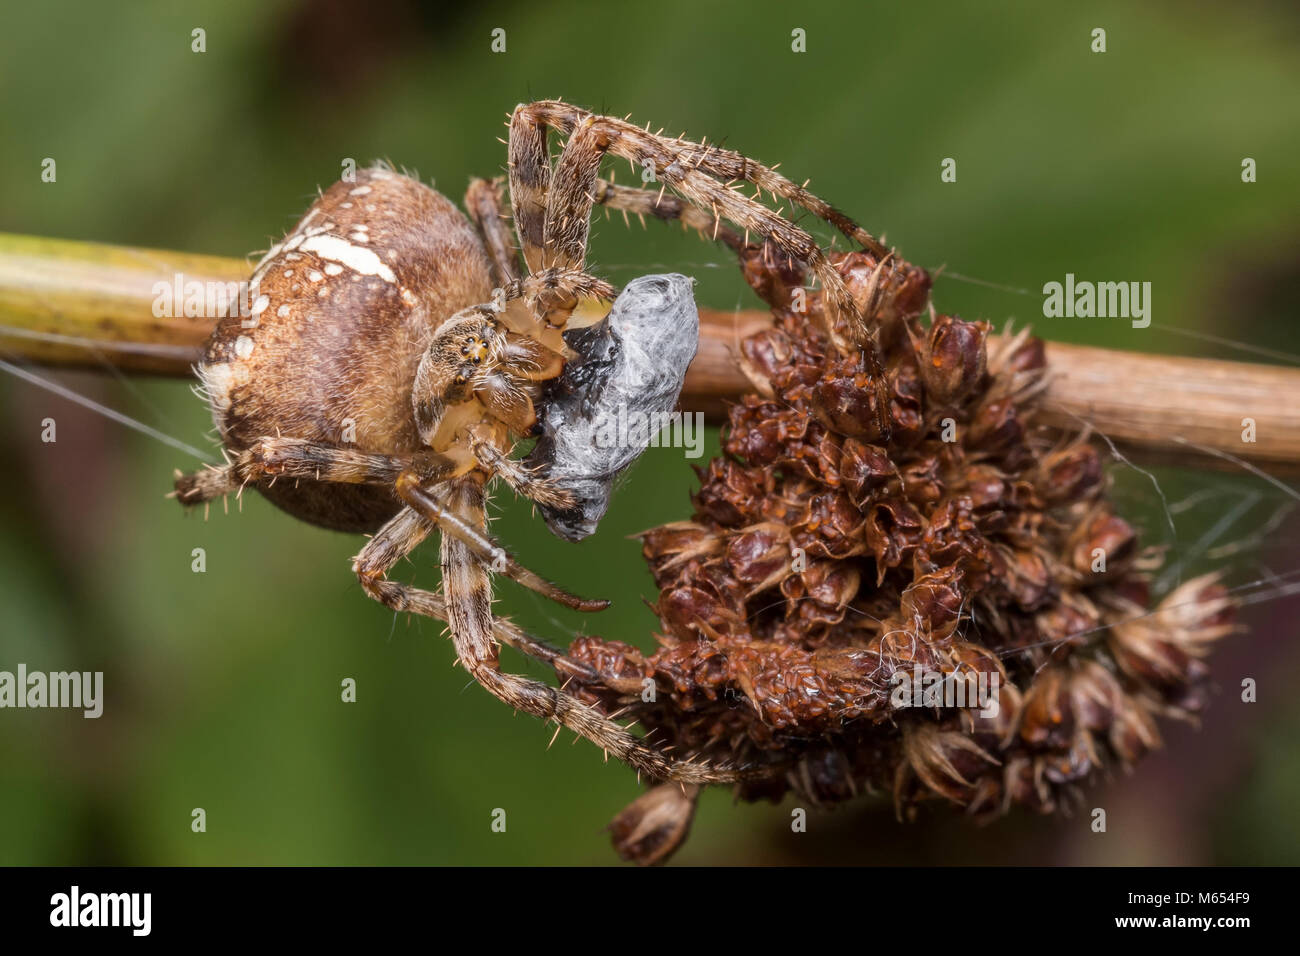 Garden Spider (Araneus diadematus) on a plant stem with its prey wrapped up. Tipperary, Ireland Stock Photo